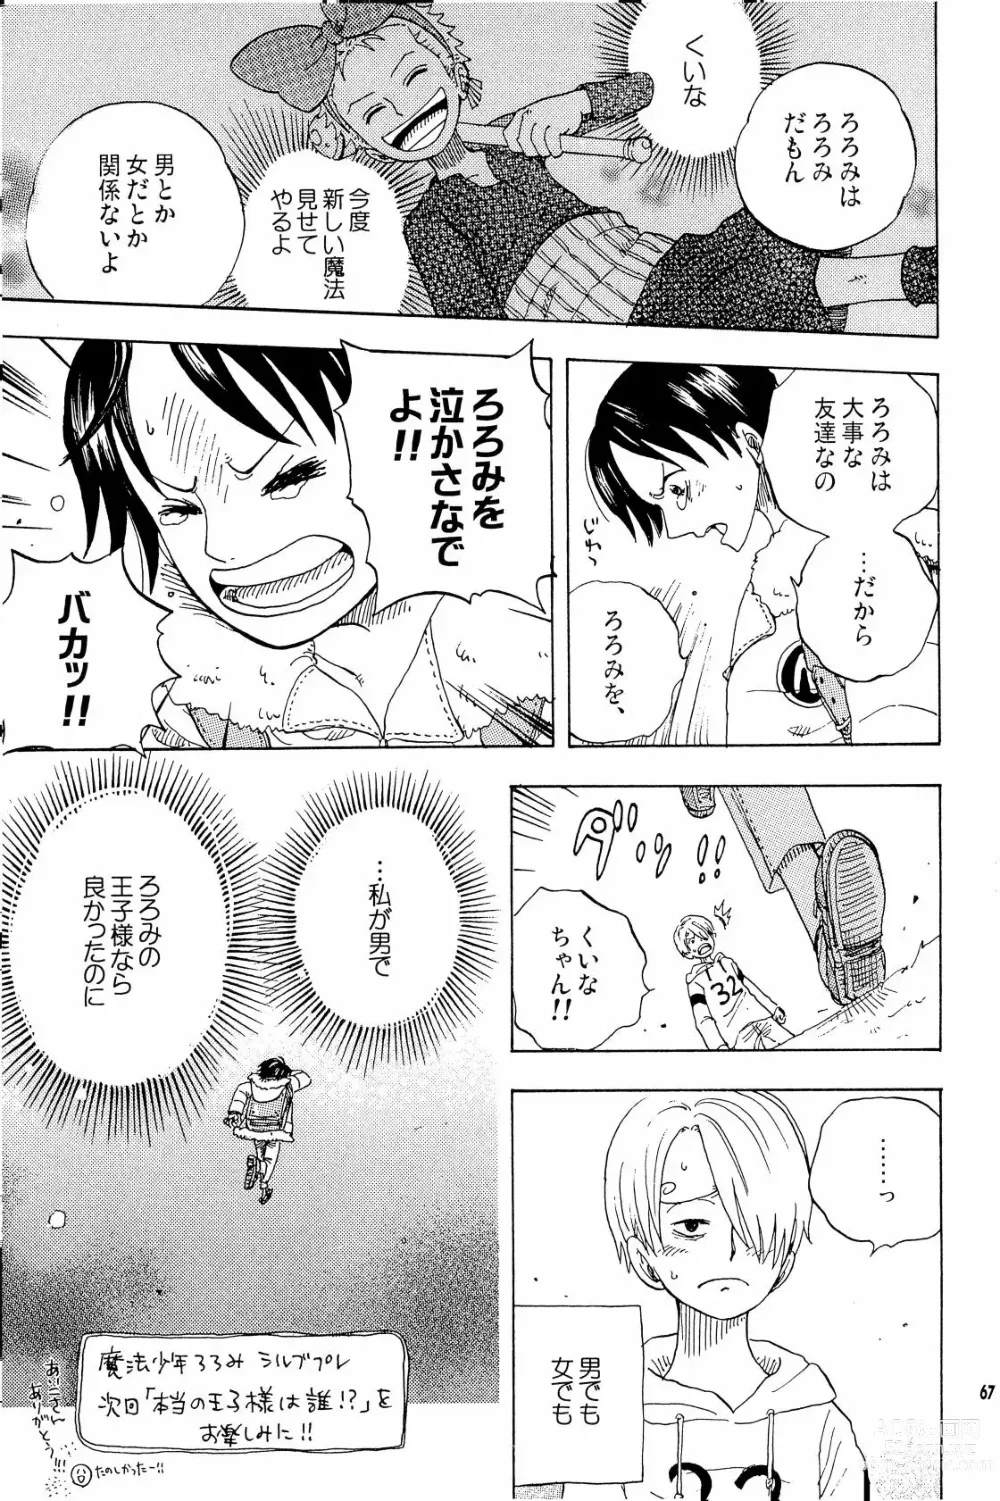 Page 66 of doujinshi your song